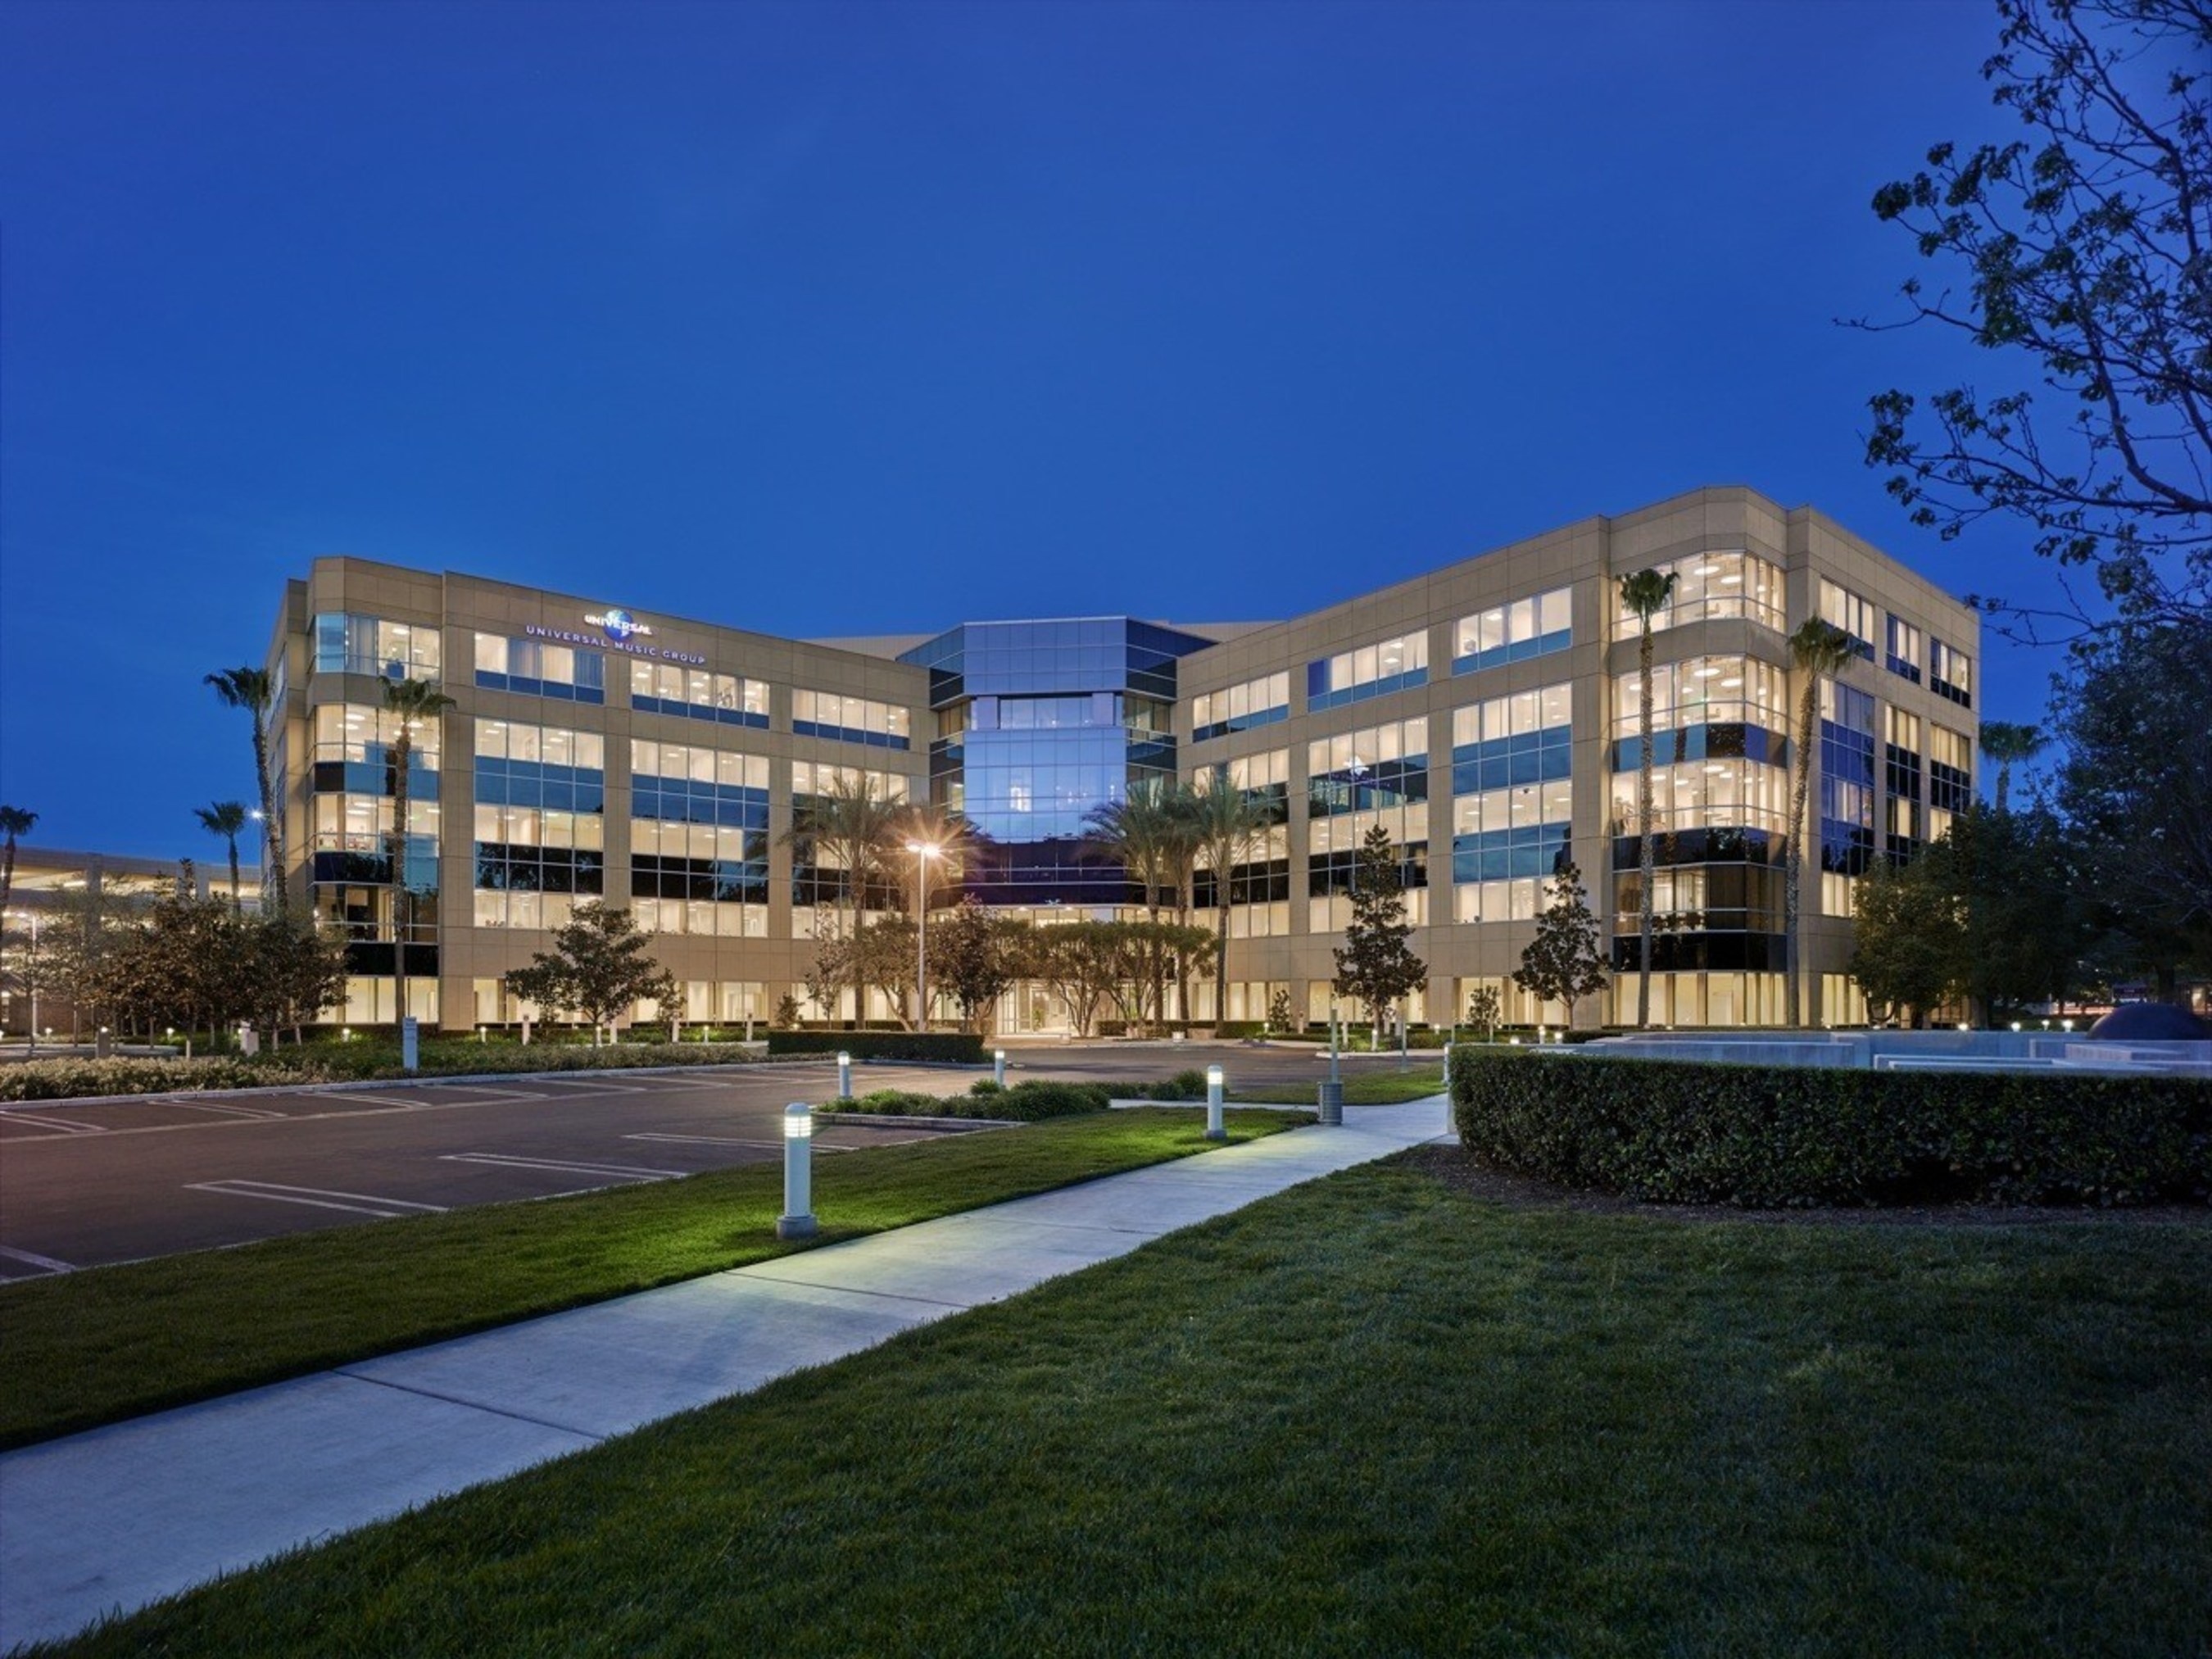 Universal Music Group's offices in Woodland Hills, Calif. using Daintree Networks ControlScope(R) wireless control solution.